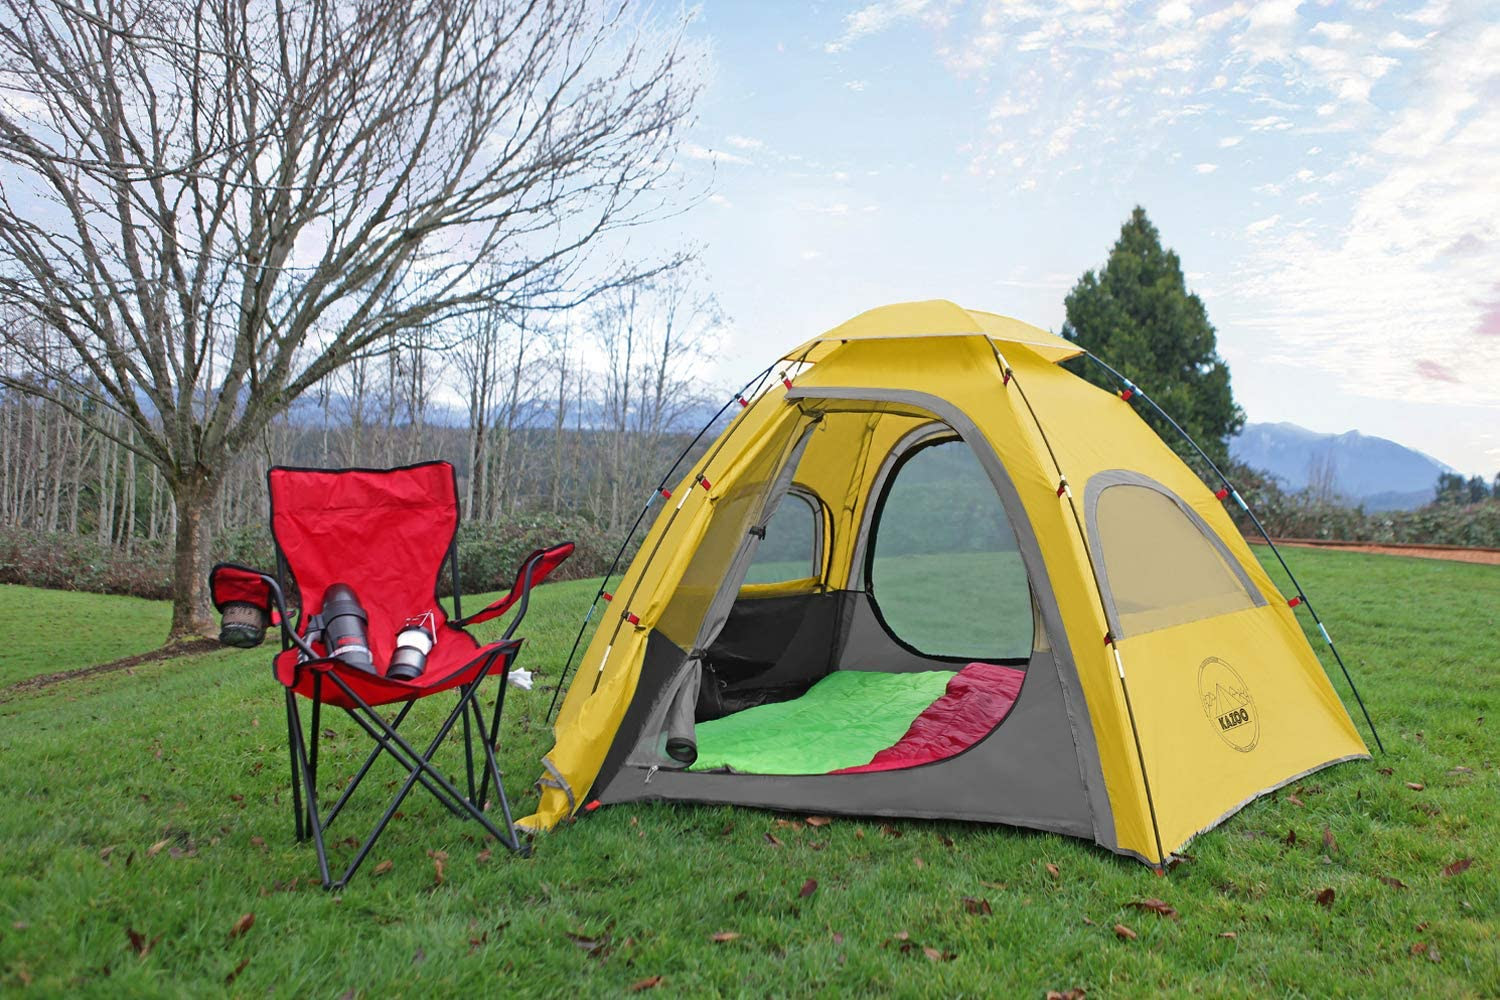 KAZOO Outdoor Waterproof Camping Tent 2/4 Person. 1200units. EXW Los Angeles 